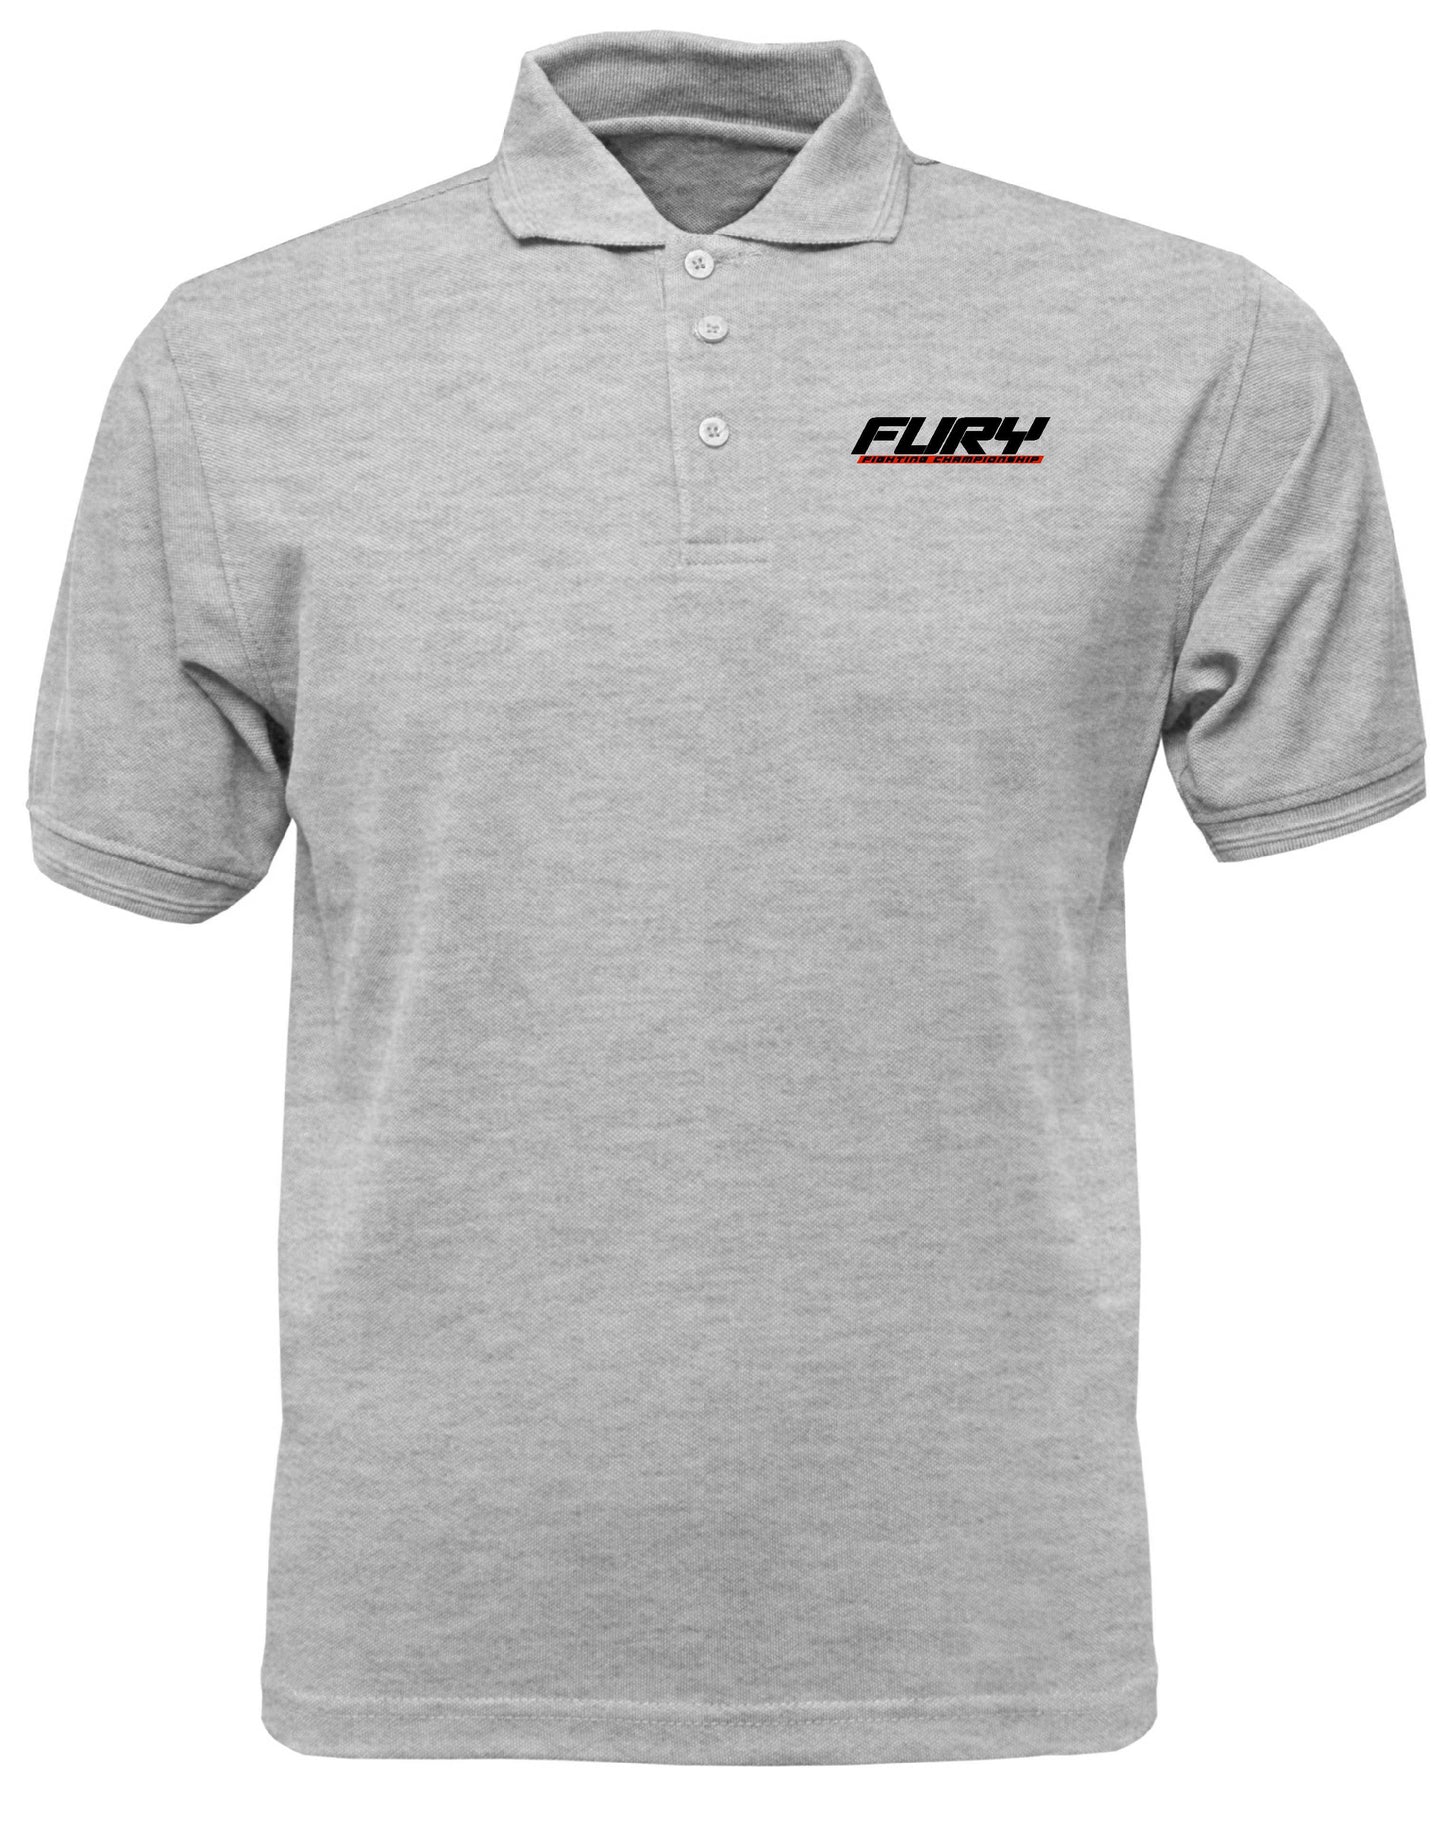 Fury Embroidered Polo